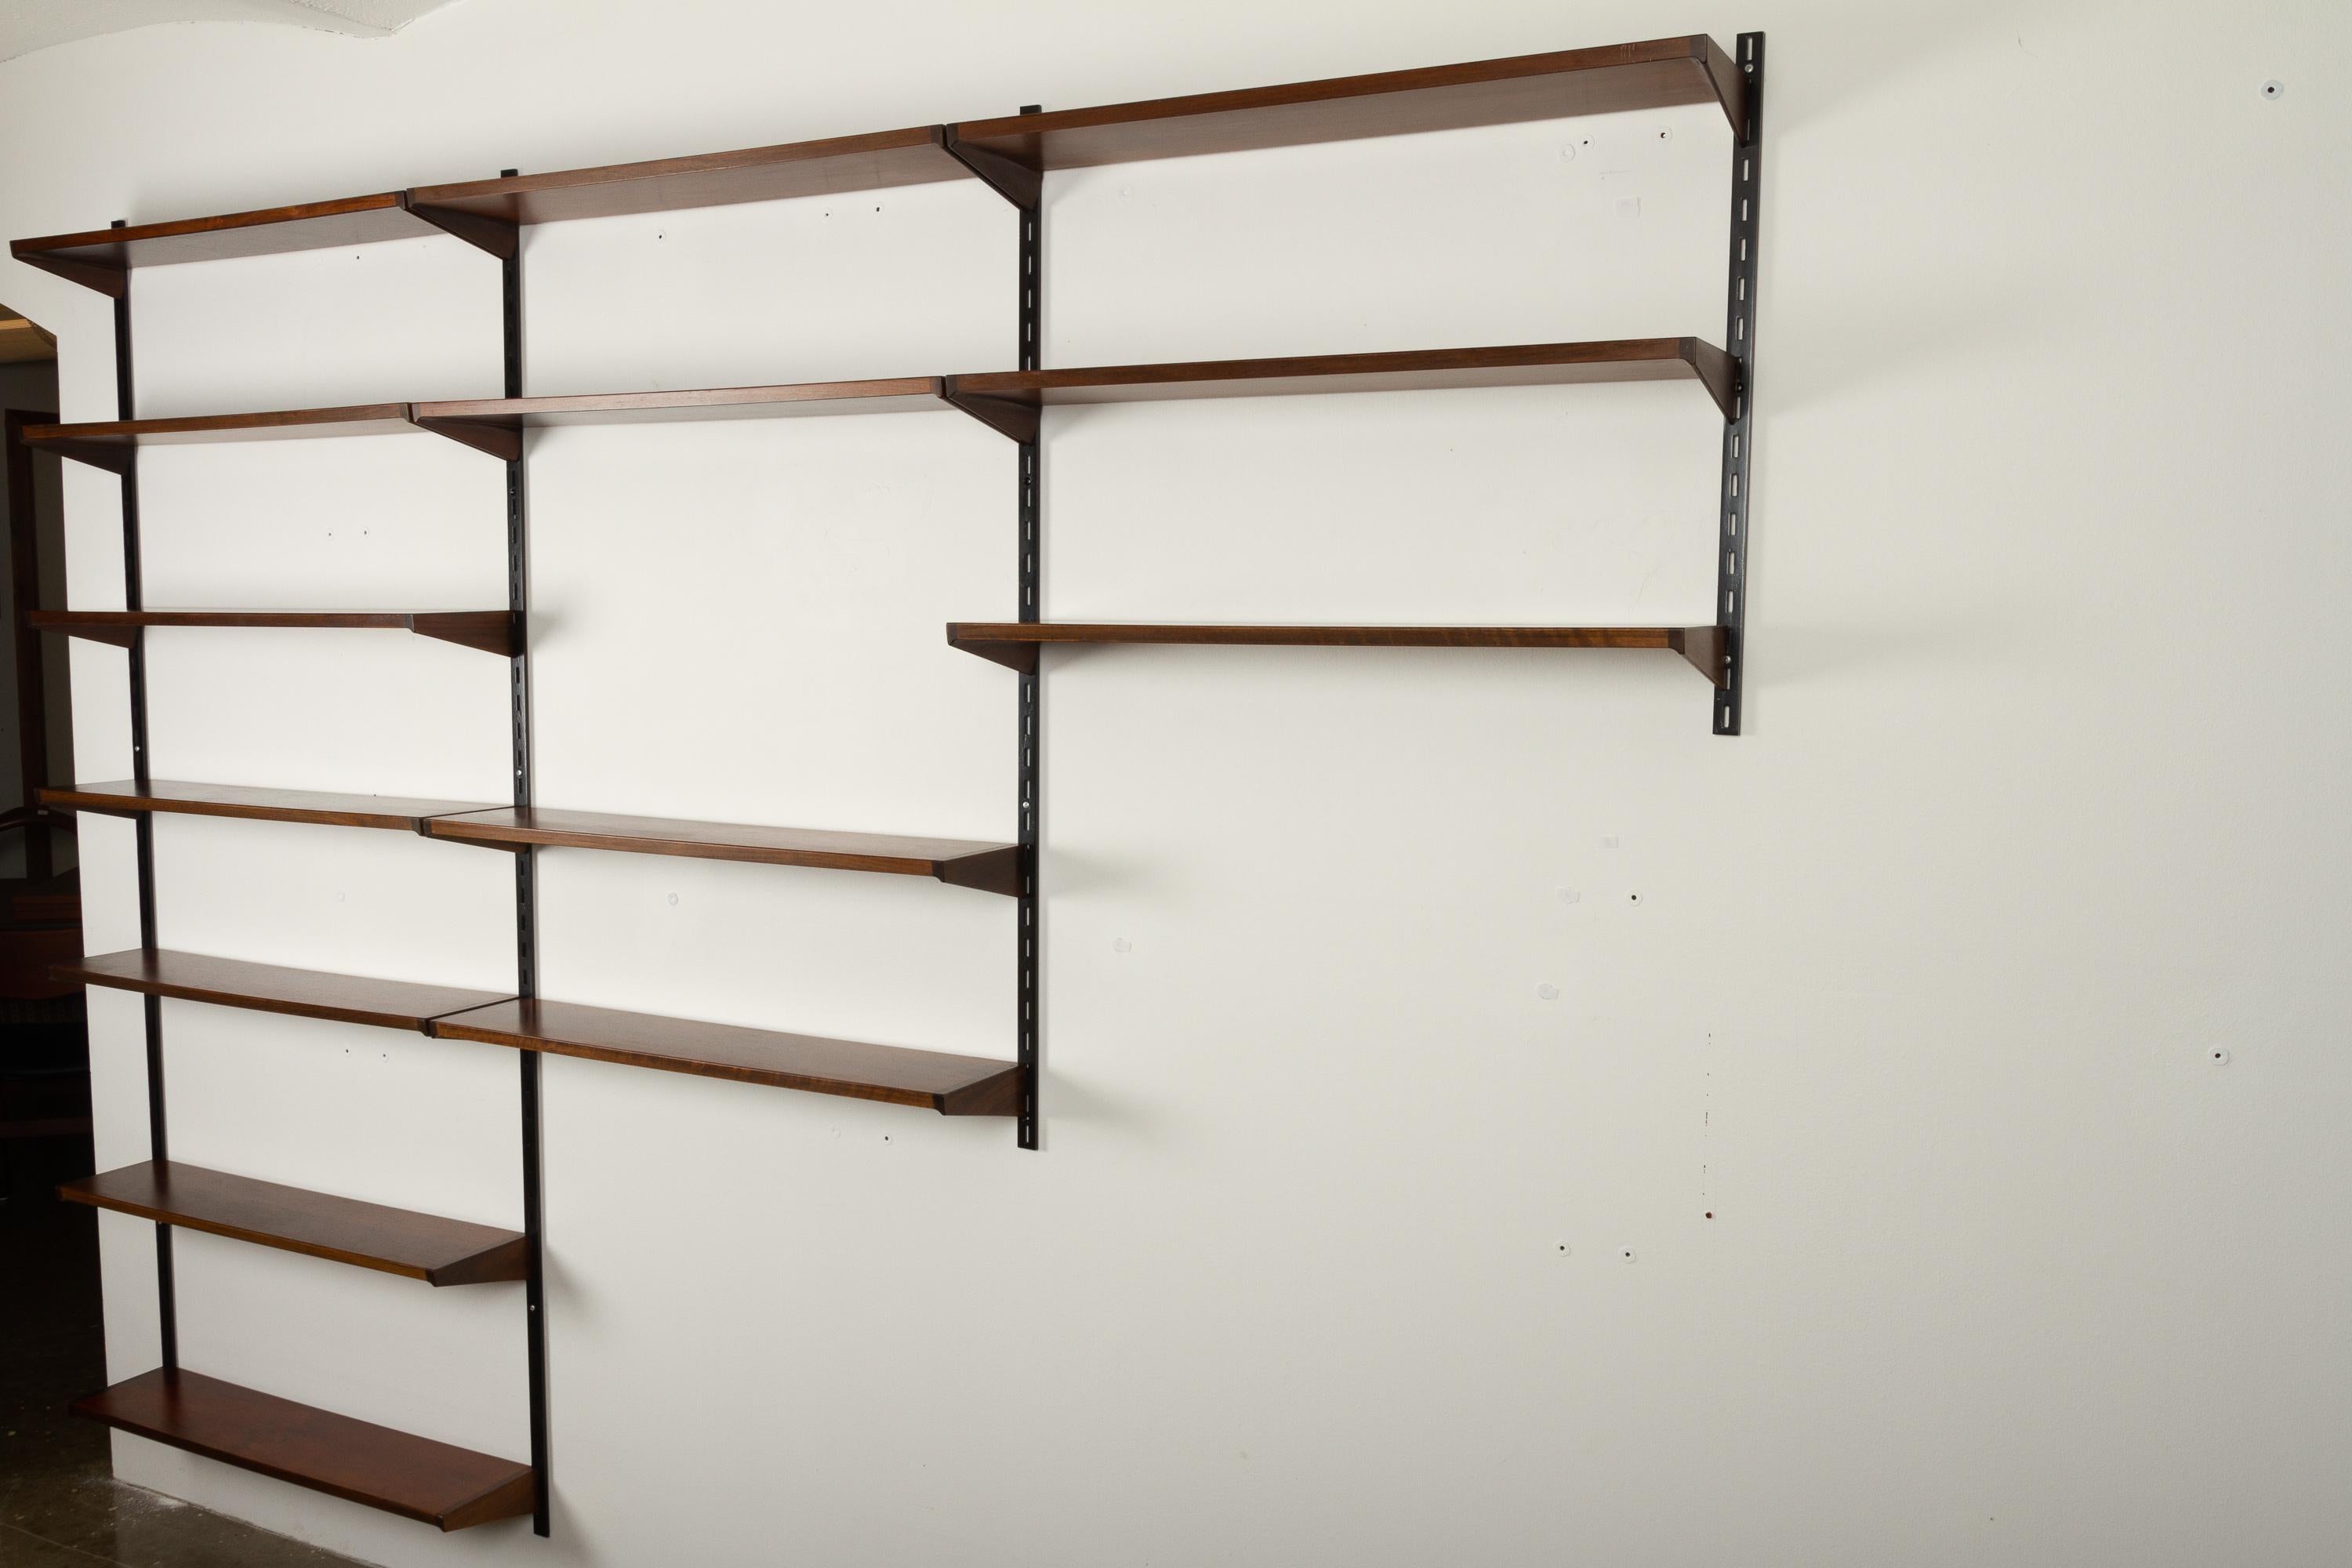 Danish vintage rosewood modular wall unit by Kai Kristiansen for FM, 1960s.
Shelving unit with shelves in rosewood veneer. Shelf ends in solid rosewood. Black aluminium wall slats. Made by Danish manufacturer Feldballe Møbelfabrik.
Very stylish